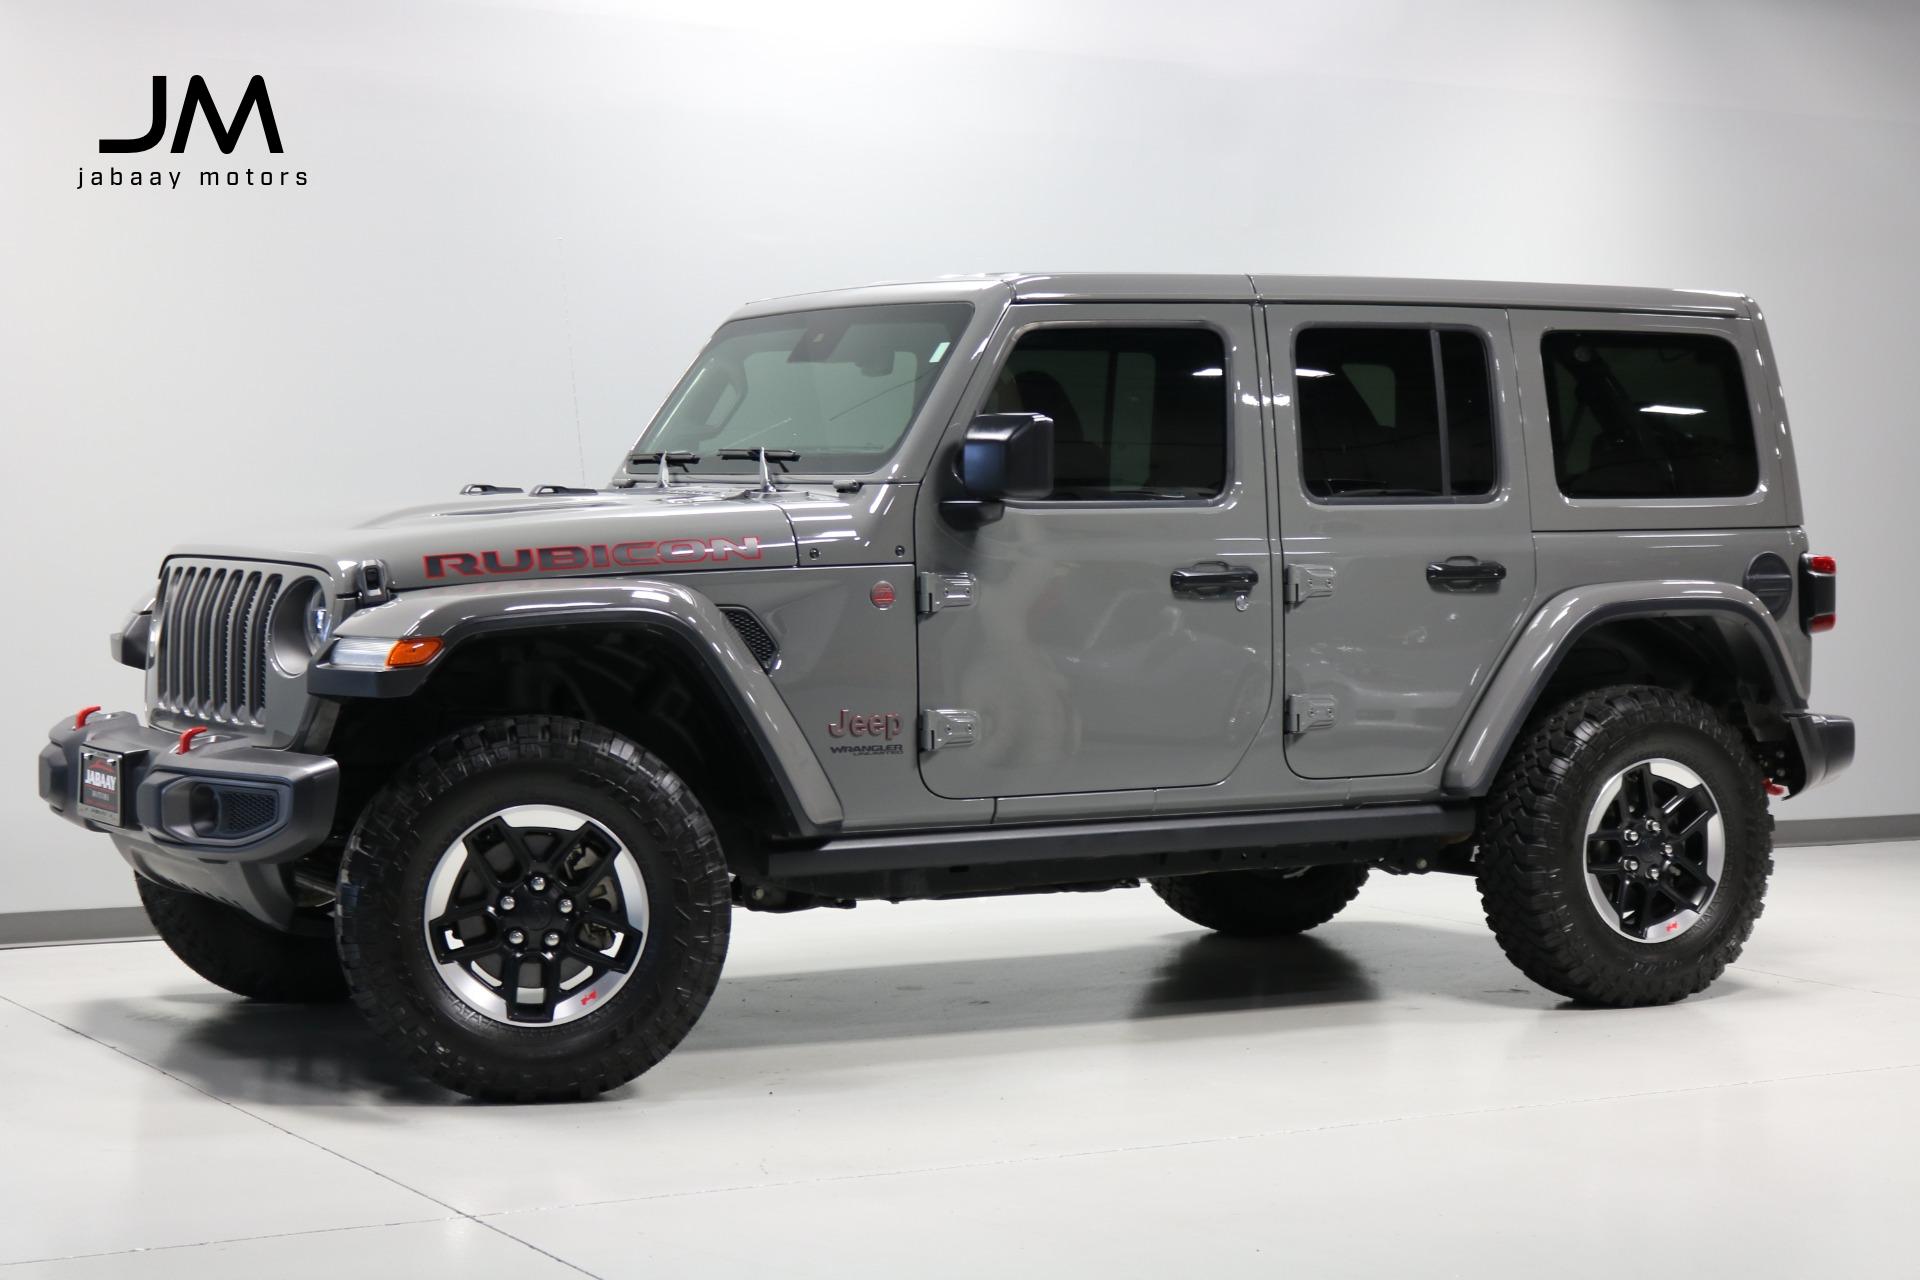 Used 19 Jeep Wrangler Unlimited Rubicon For Sale Sold Jabaay Motors Inc Stock Jm7260